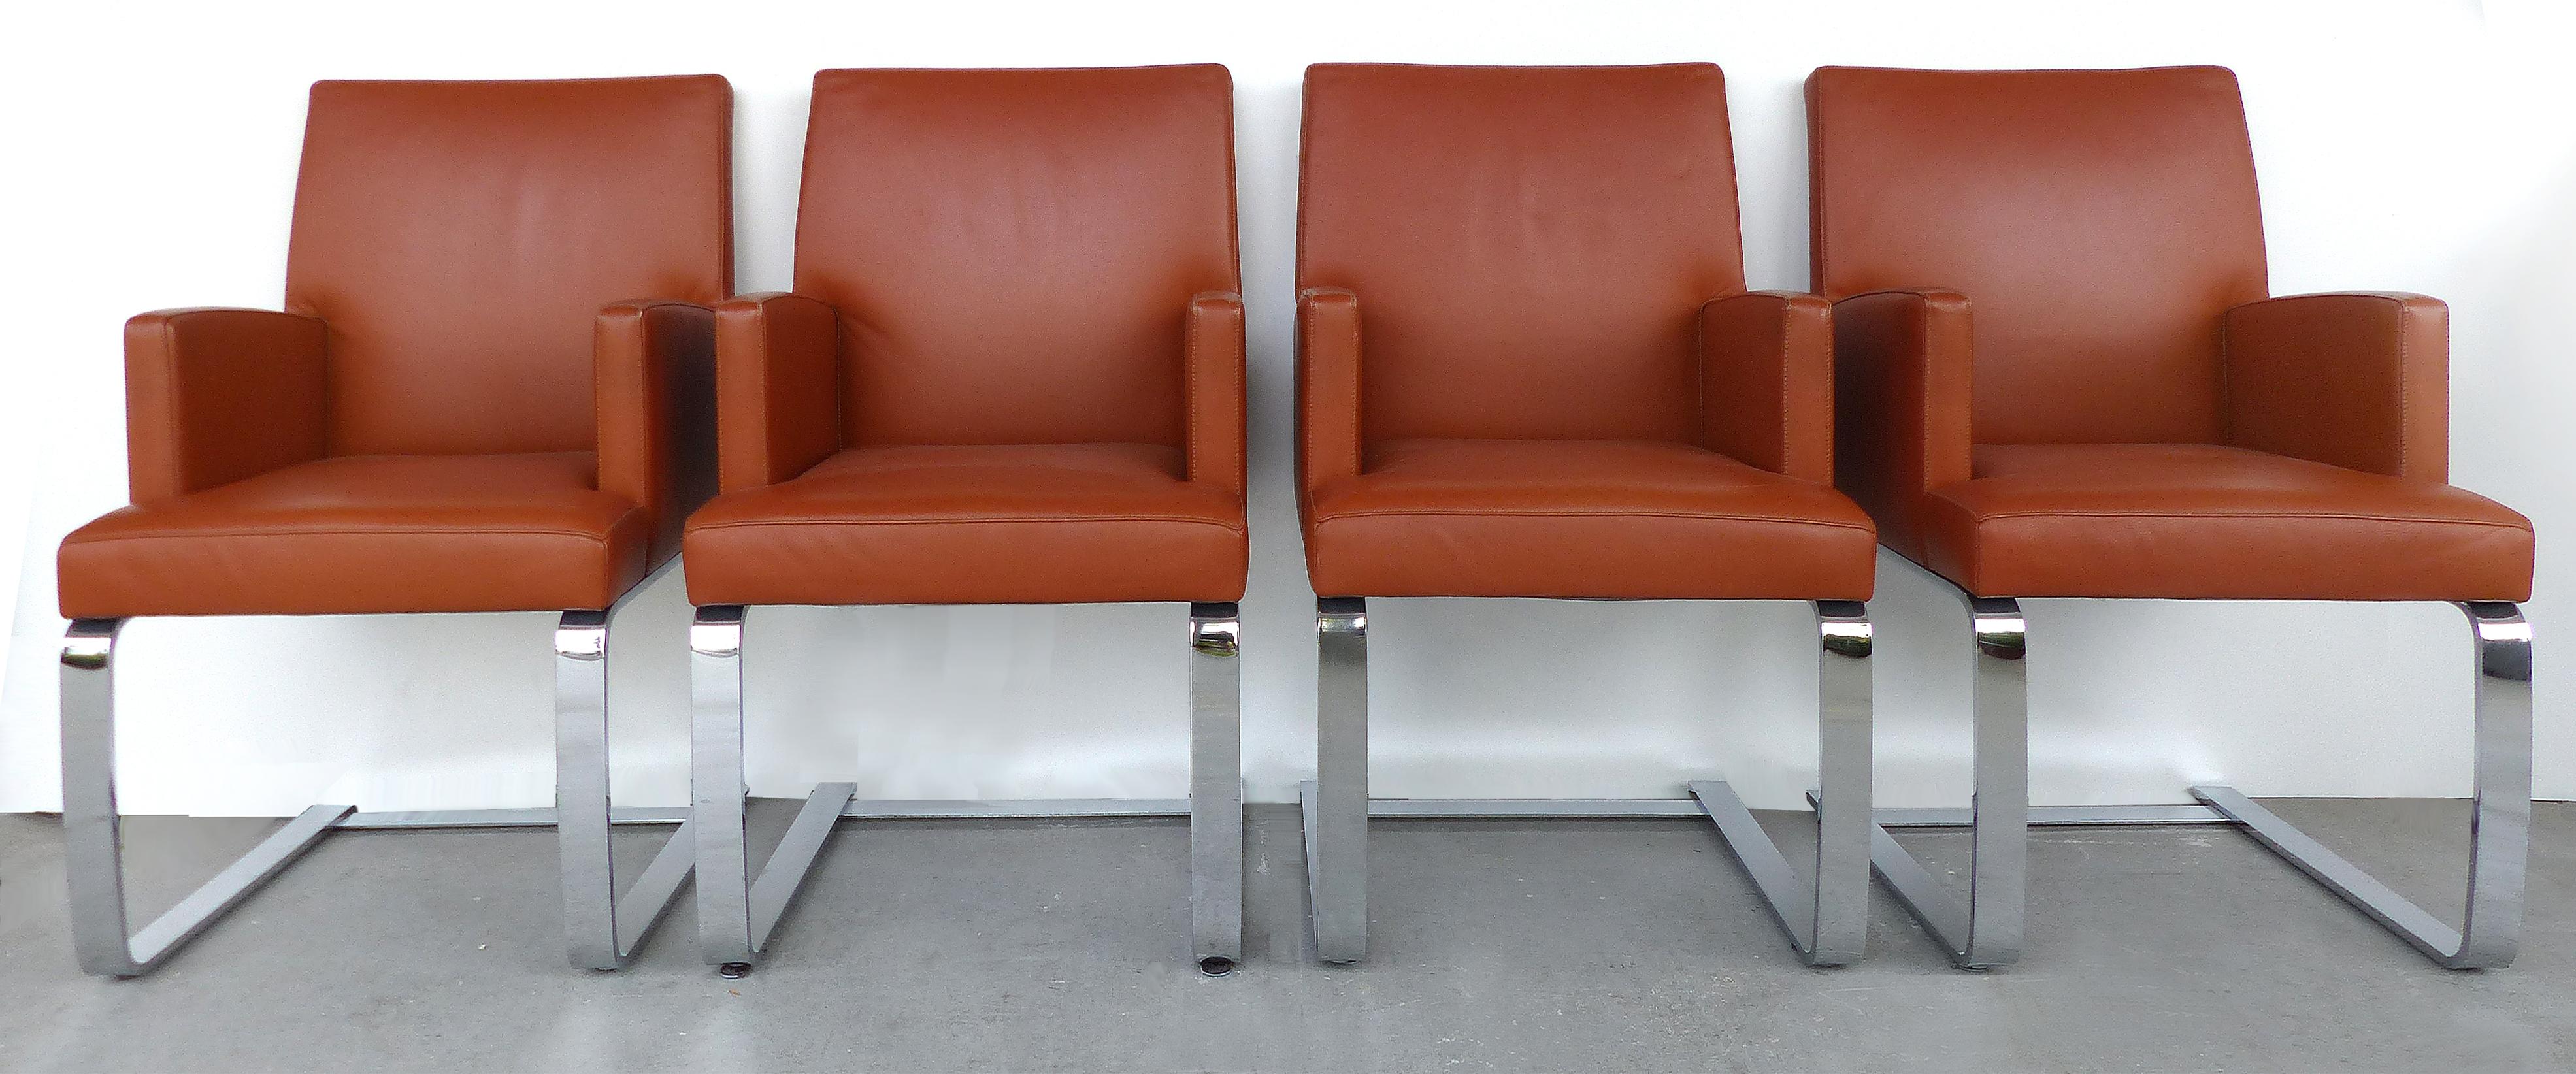 De Sede of Switzerland Cantilevered Leather and Stainless Steel Chairs, '4'

Offered for sale is a set of four leather and stainless steel club chairs by De Sede of Switzerland, circa 1990. Measures: Arm, 26